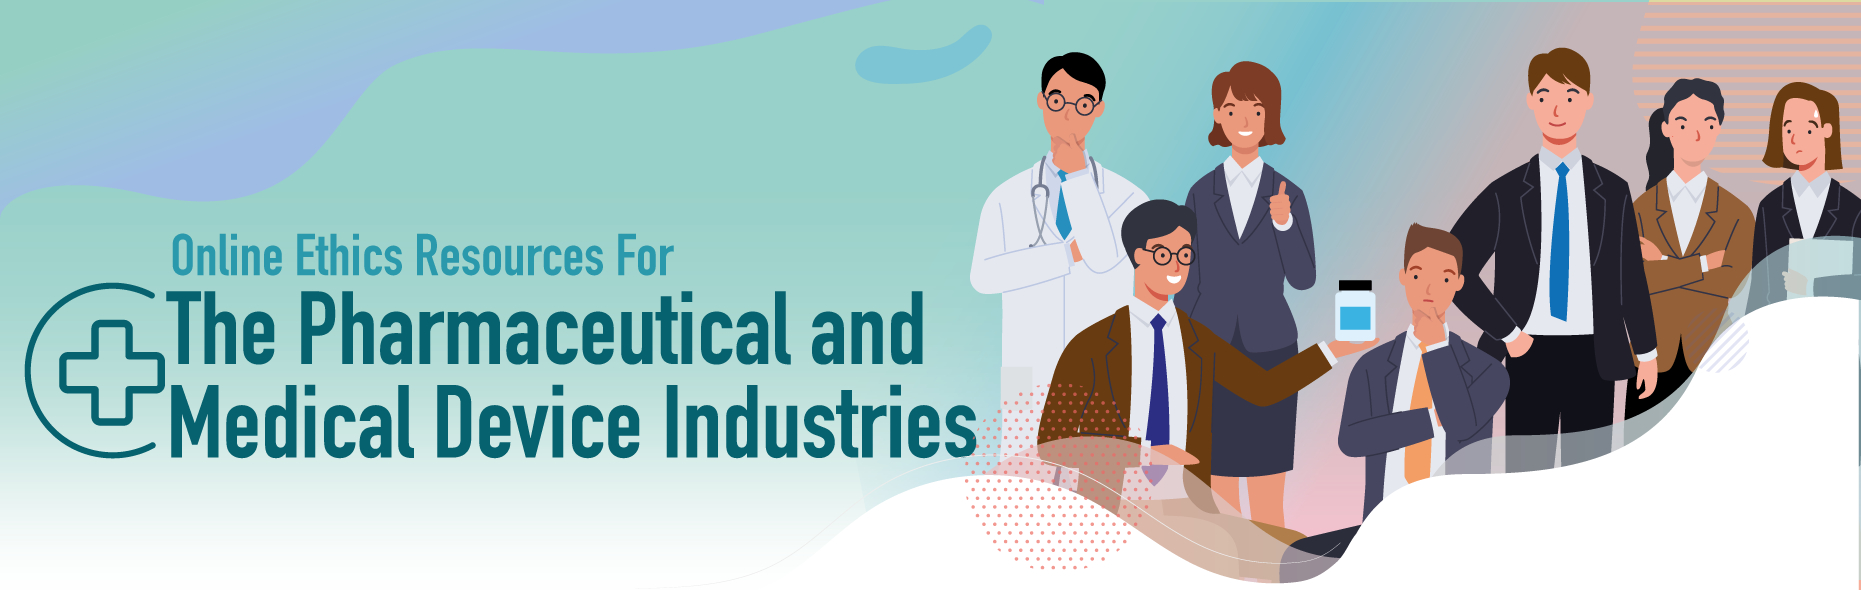 Online Ethics Resources for The Pharmaceutical and Medical Device Industries